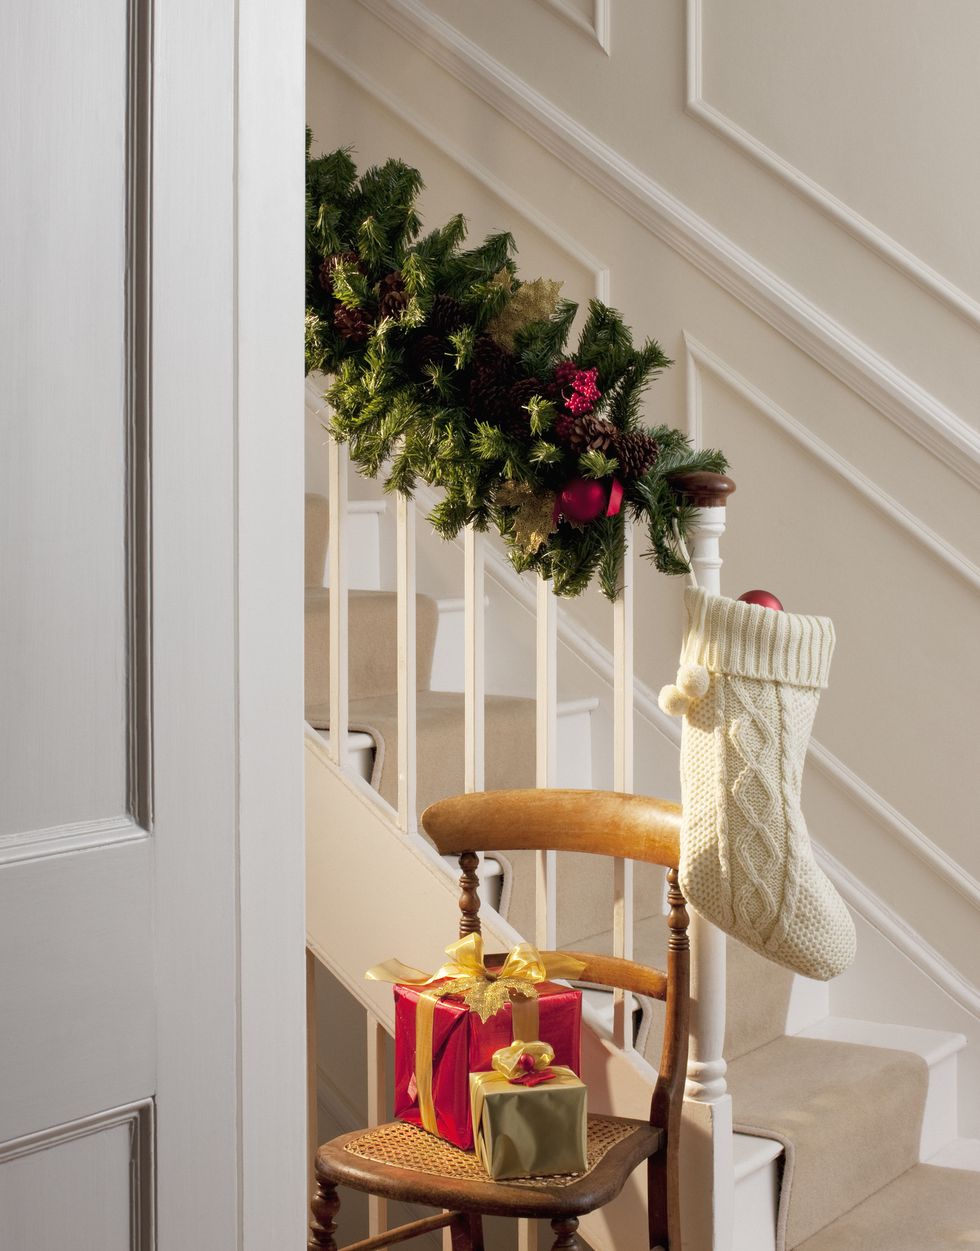 Christmas gifts and stocking near staircase in hallway